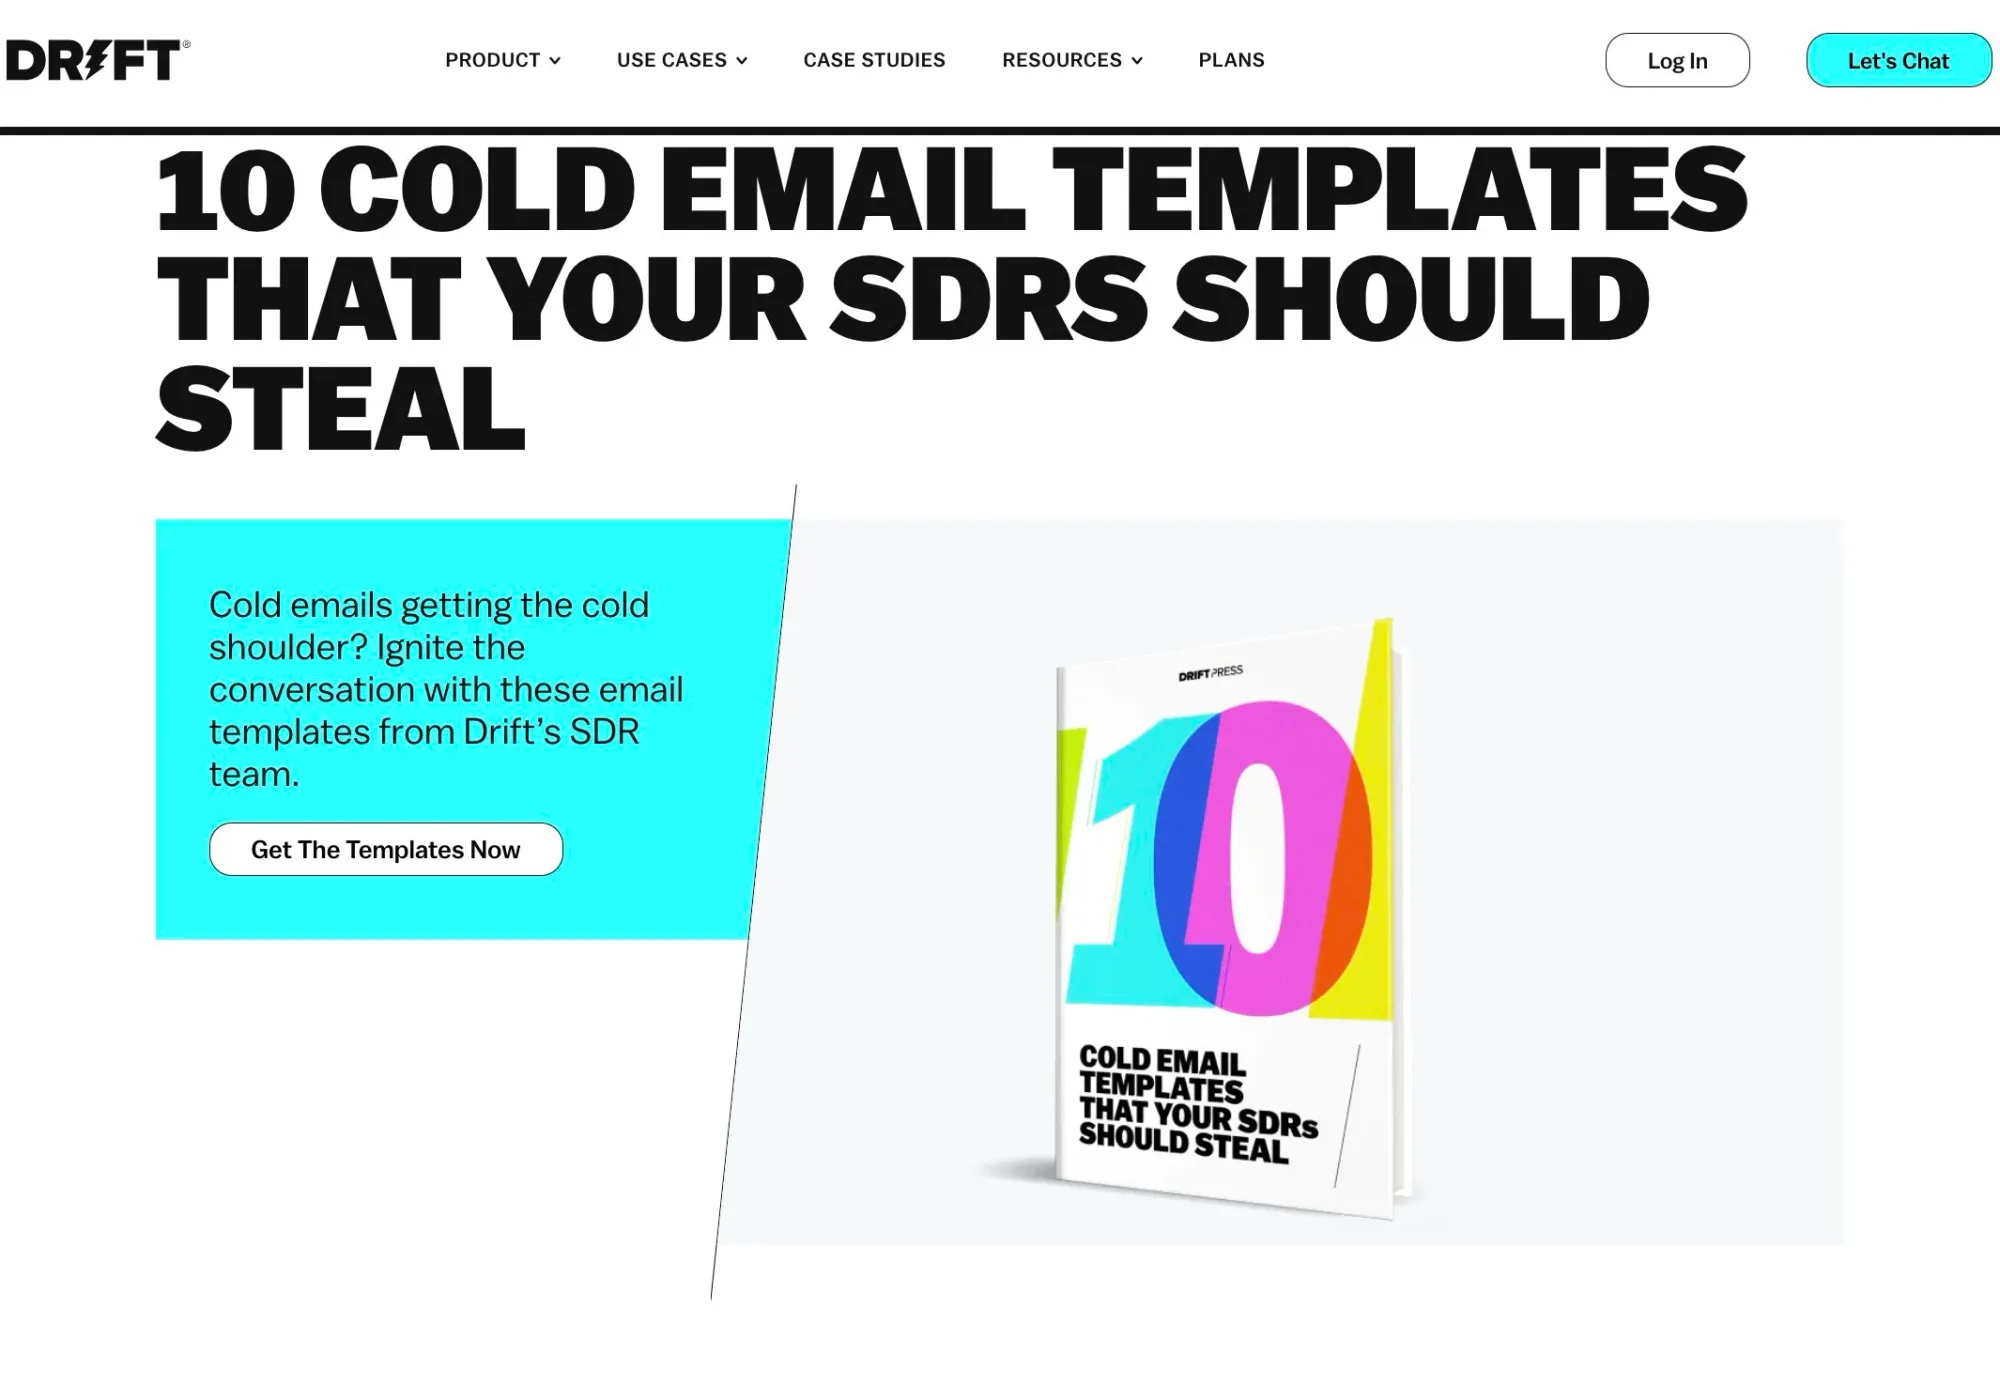 Content marketing example: Ebook about Email Templates by Drift